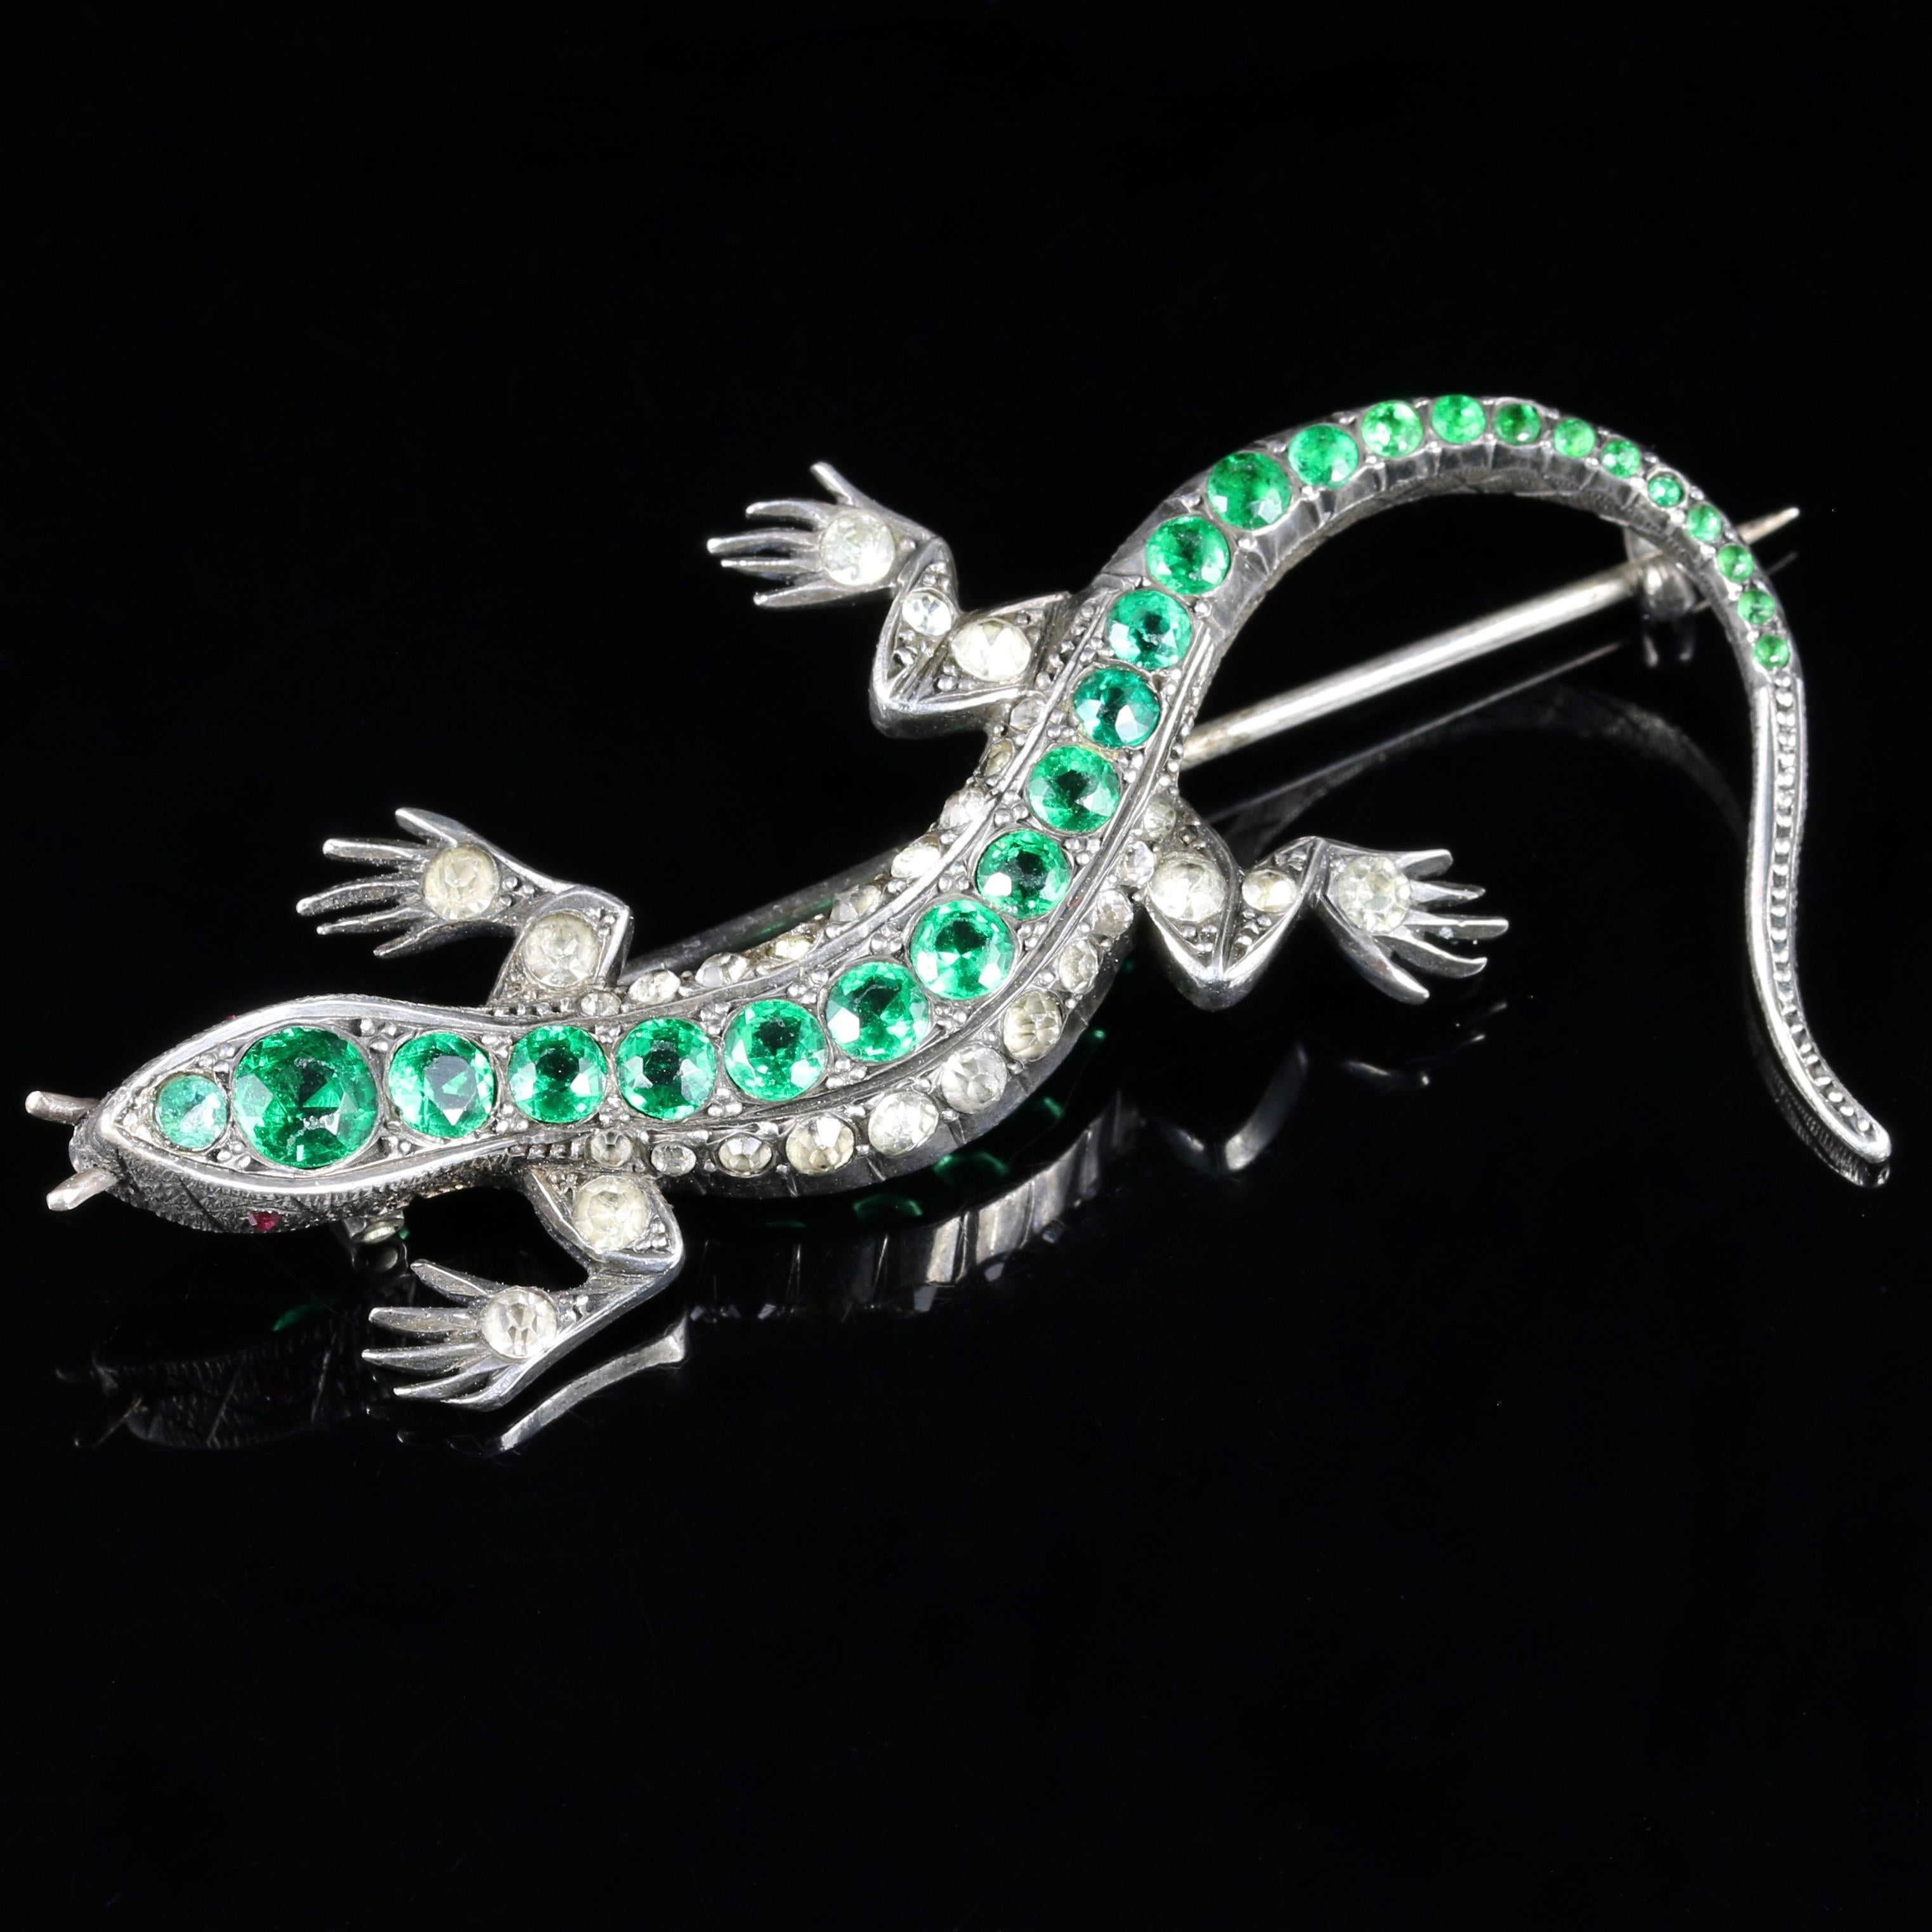 For more details please click continue reading down below...

This genuine Victorian lizard brooch is adorned with sparkling old cut Paste Stones all round. Circa 1890

The lizards body is decorated with beautiful Green and White Paste stones, with